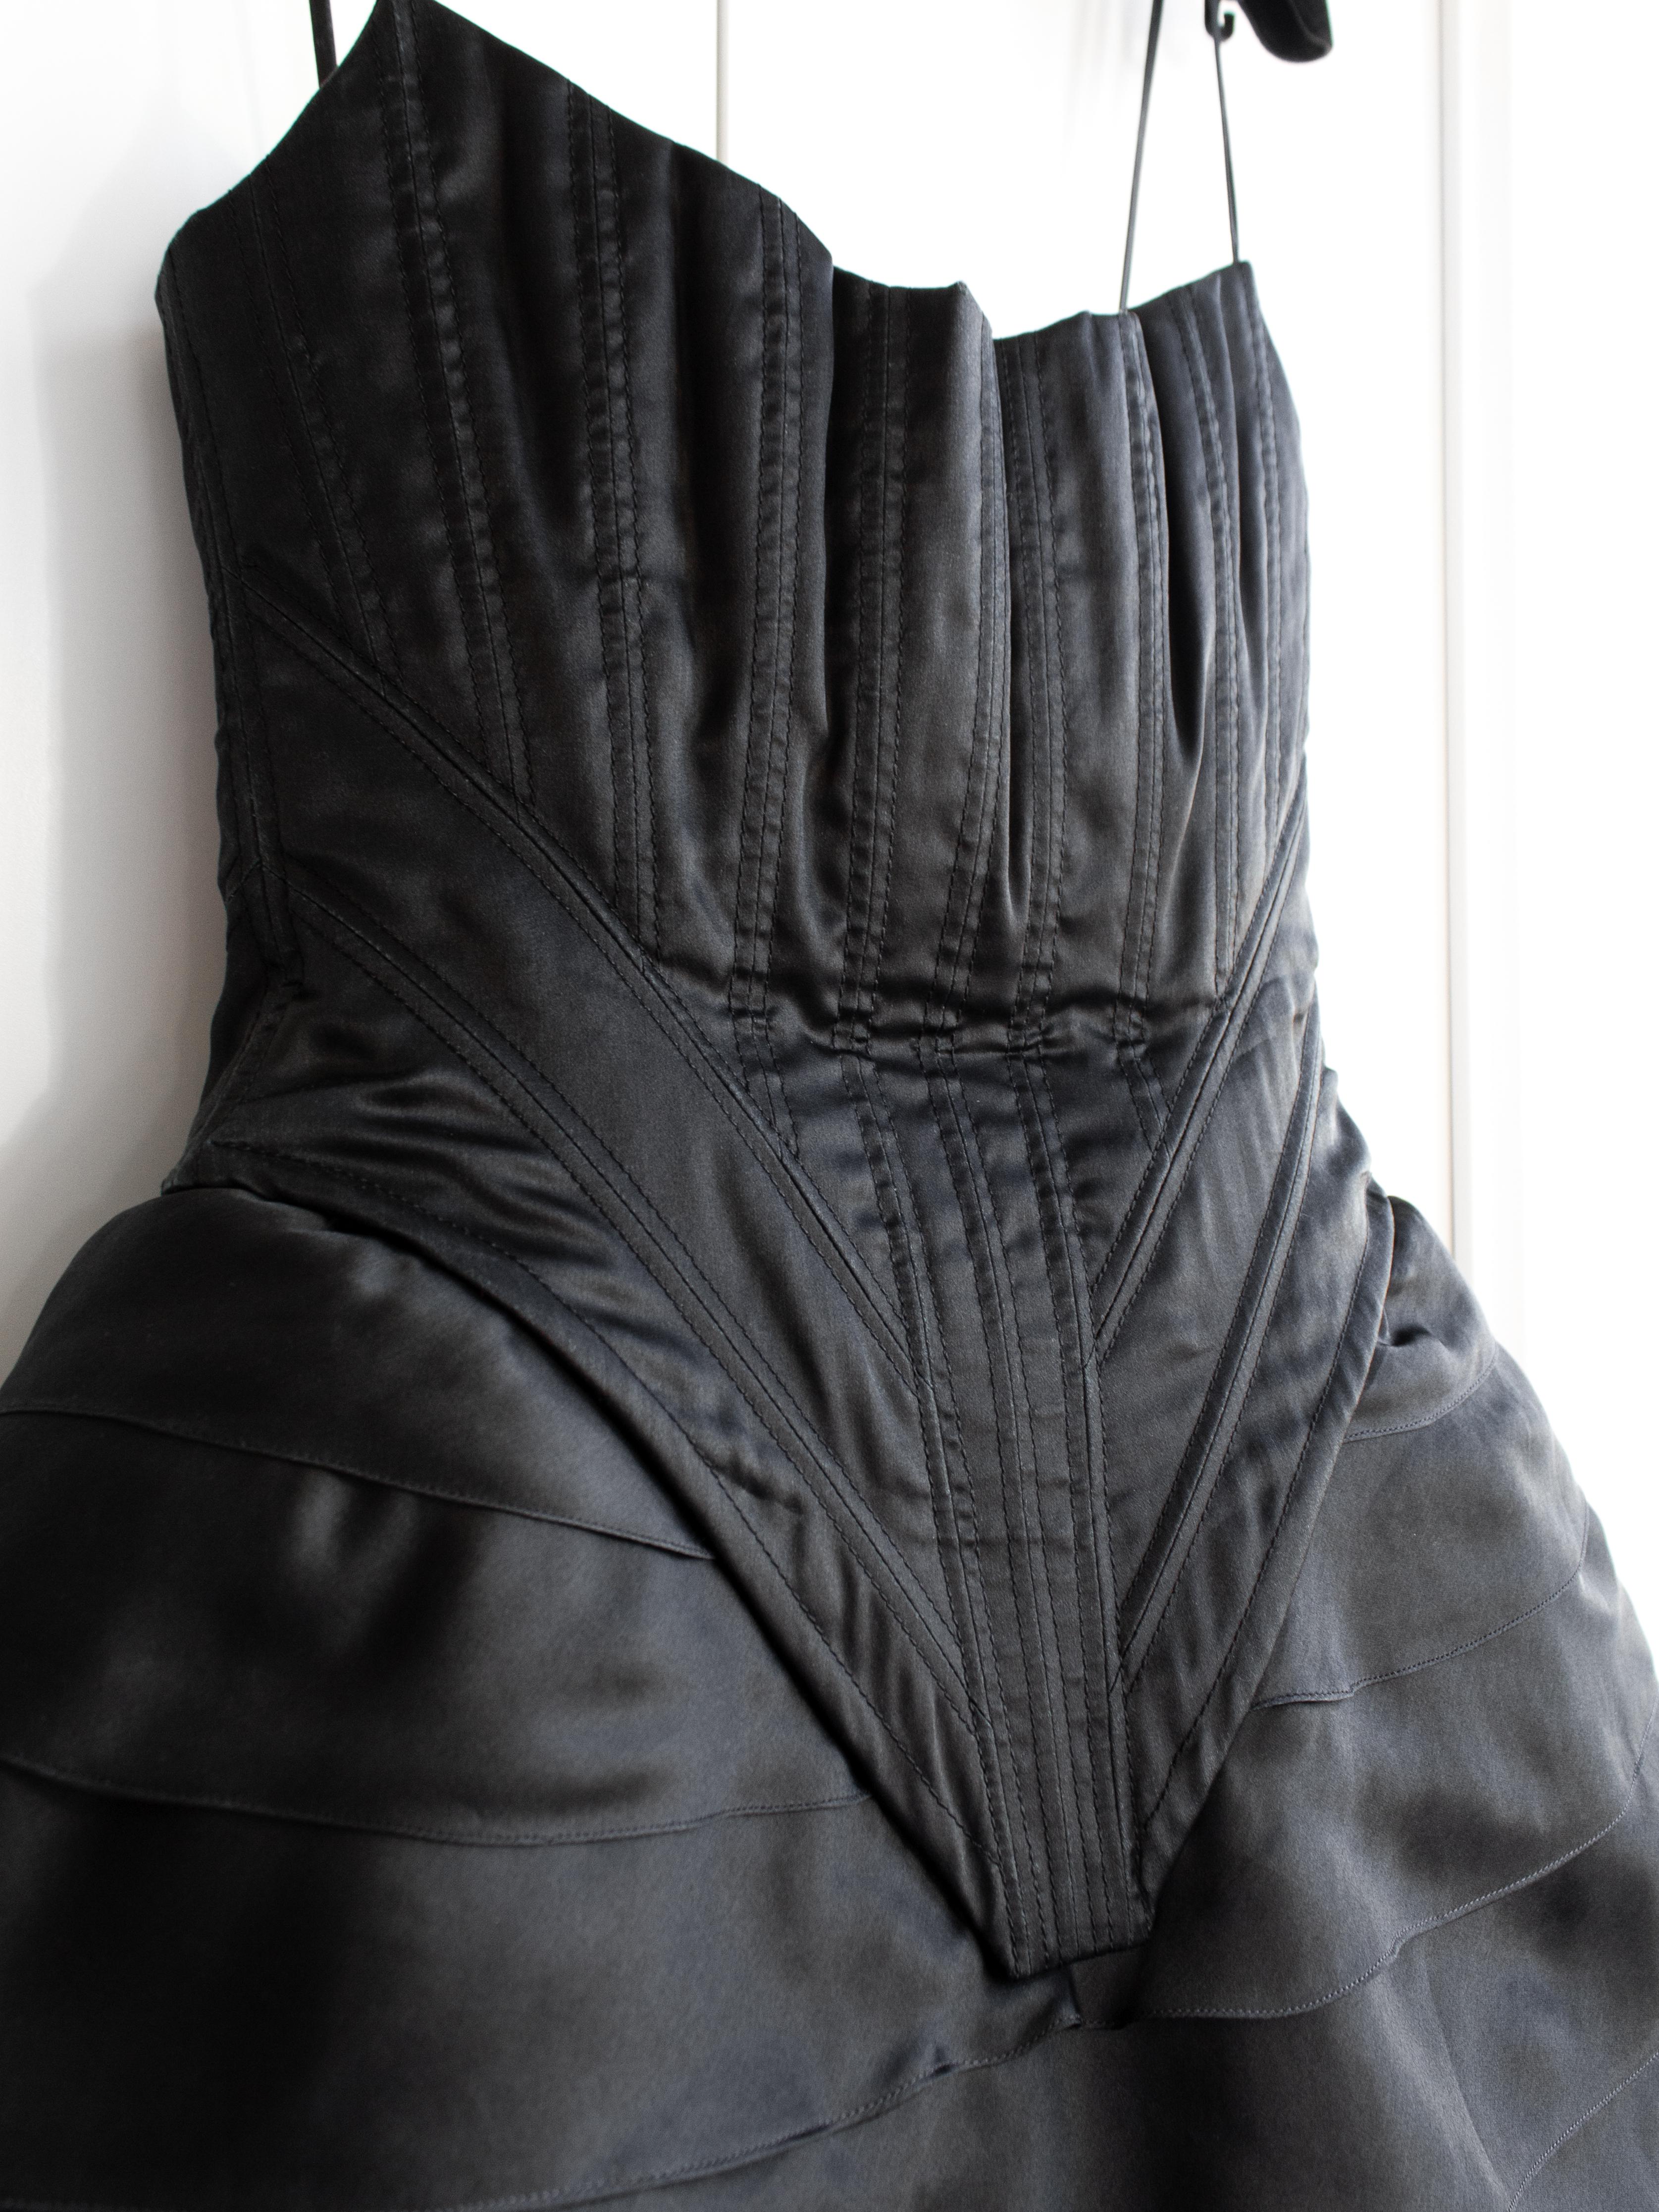 Chanel Vintage Haute Couture Fall/Winter 1992 Black Satin Corset Gown Dress For Sale 4